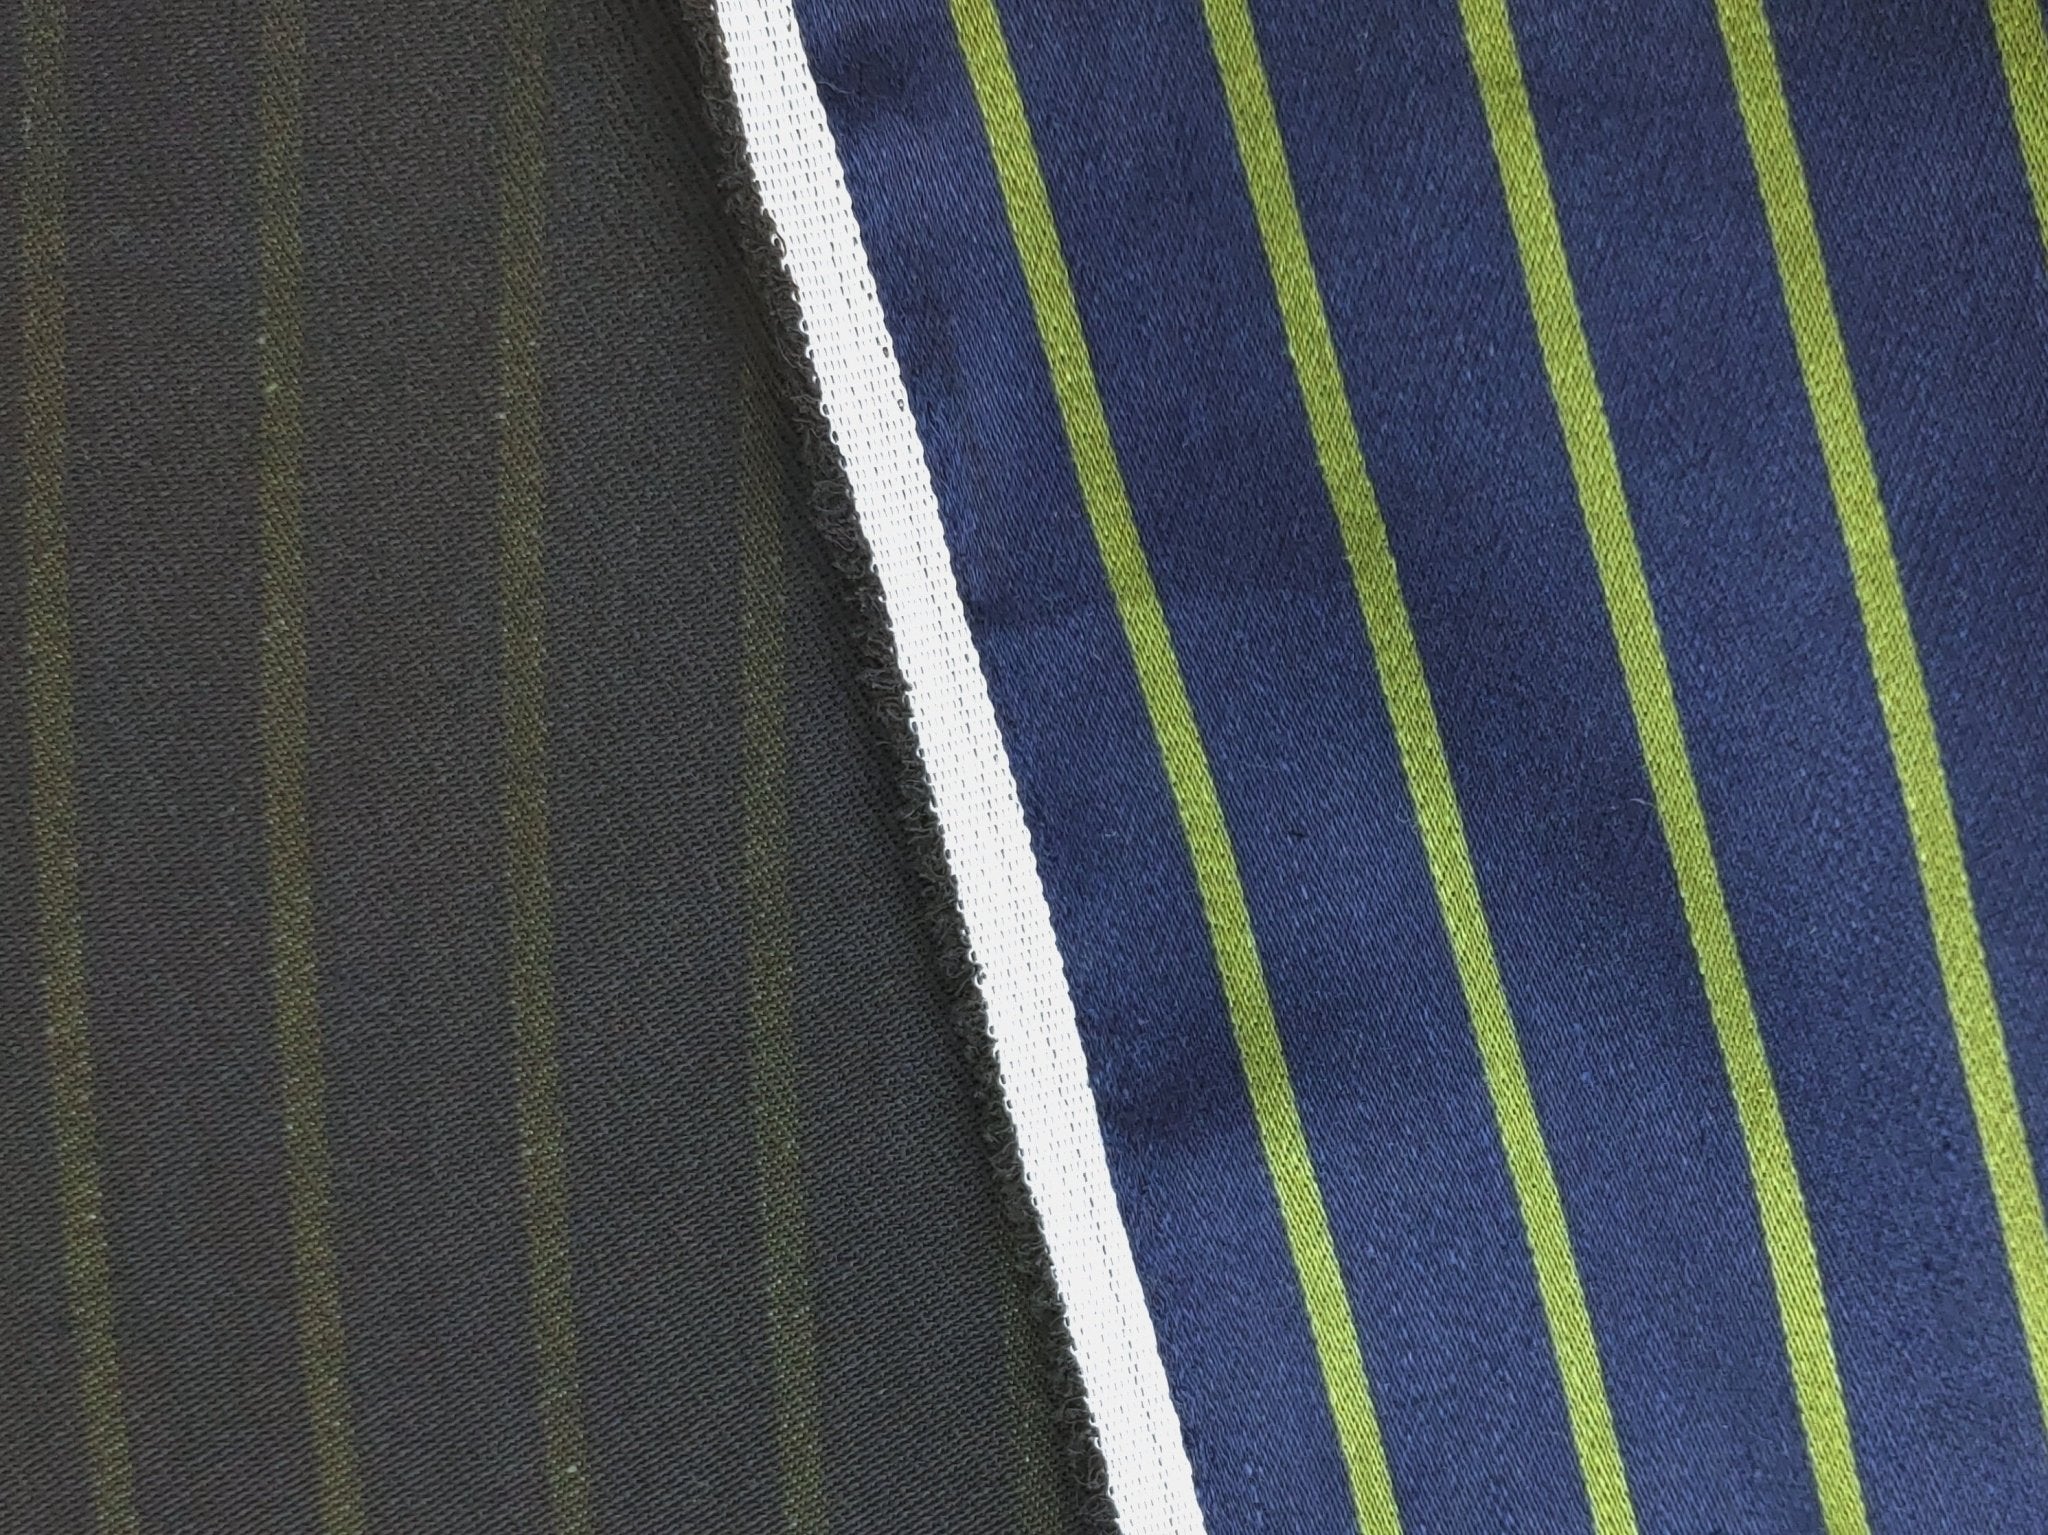 Linen Polyester Stretch Fabric with Satin Weave Stripe Pattern 6038 - The Linen Lab - Navy